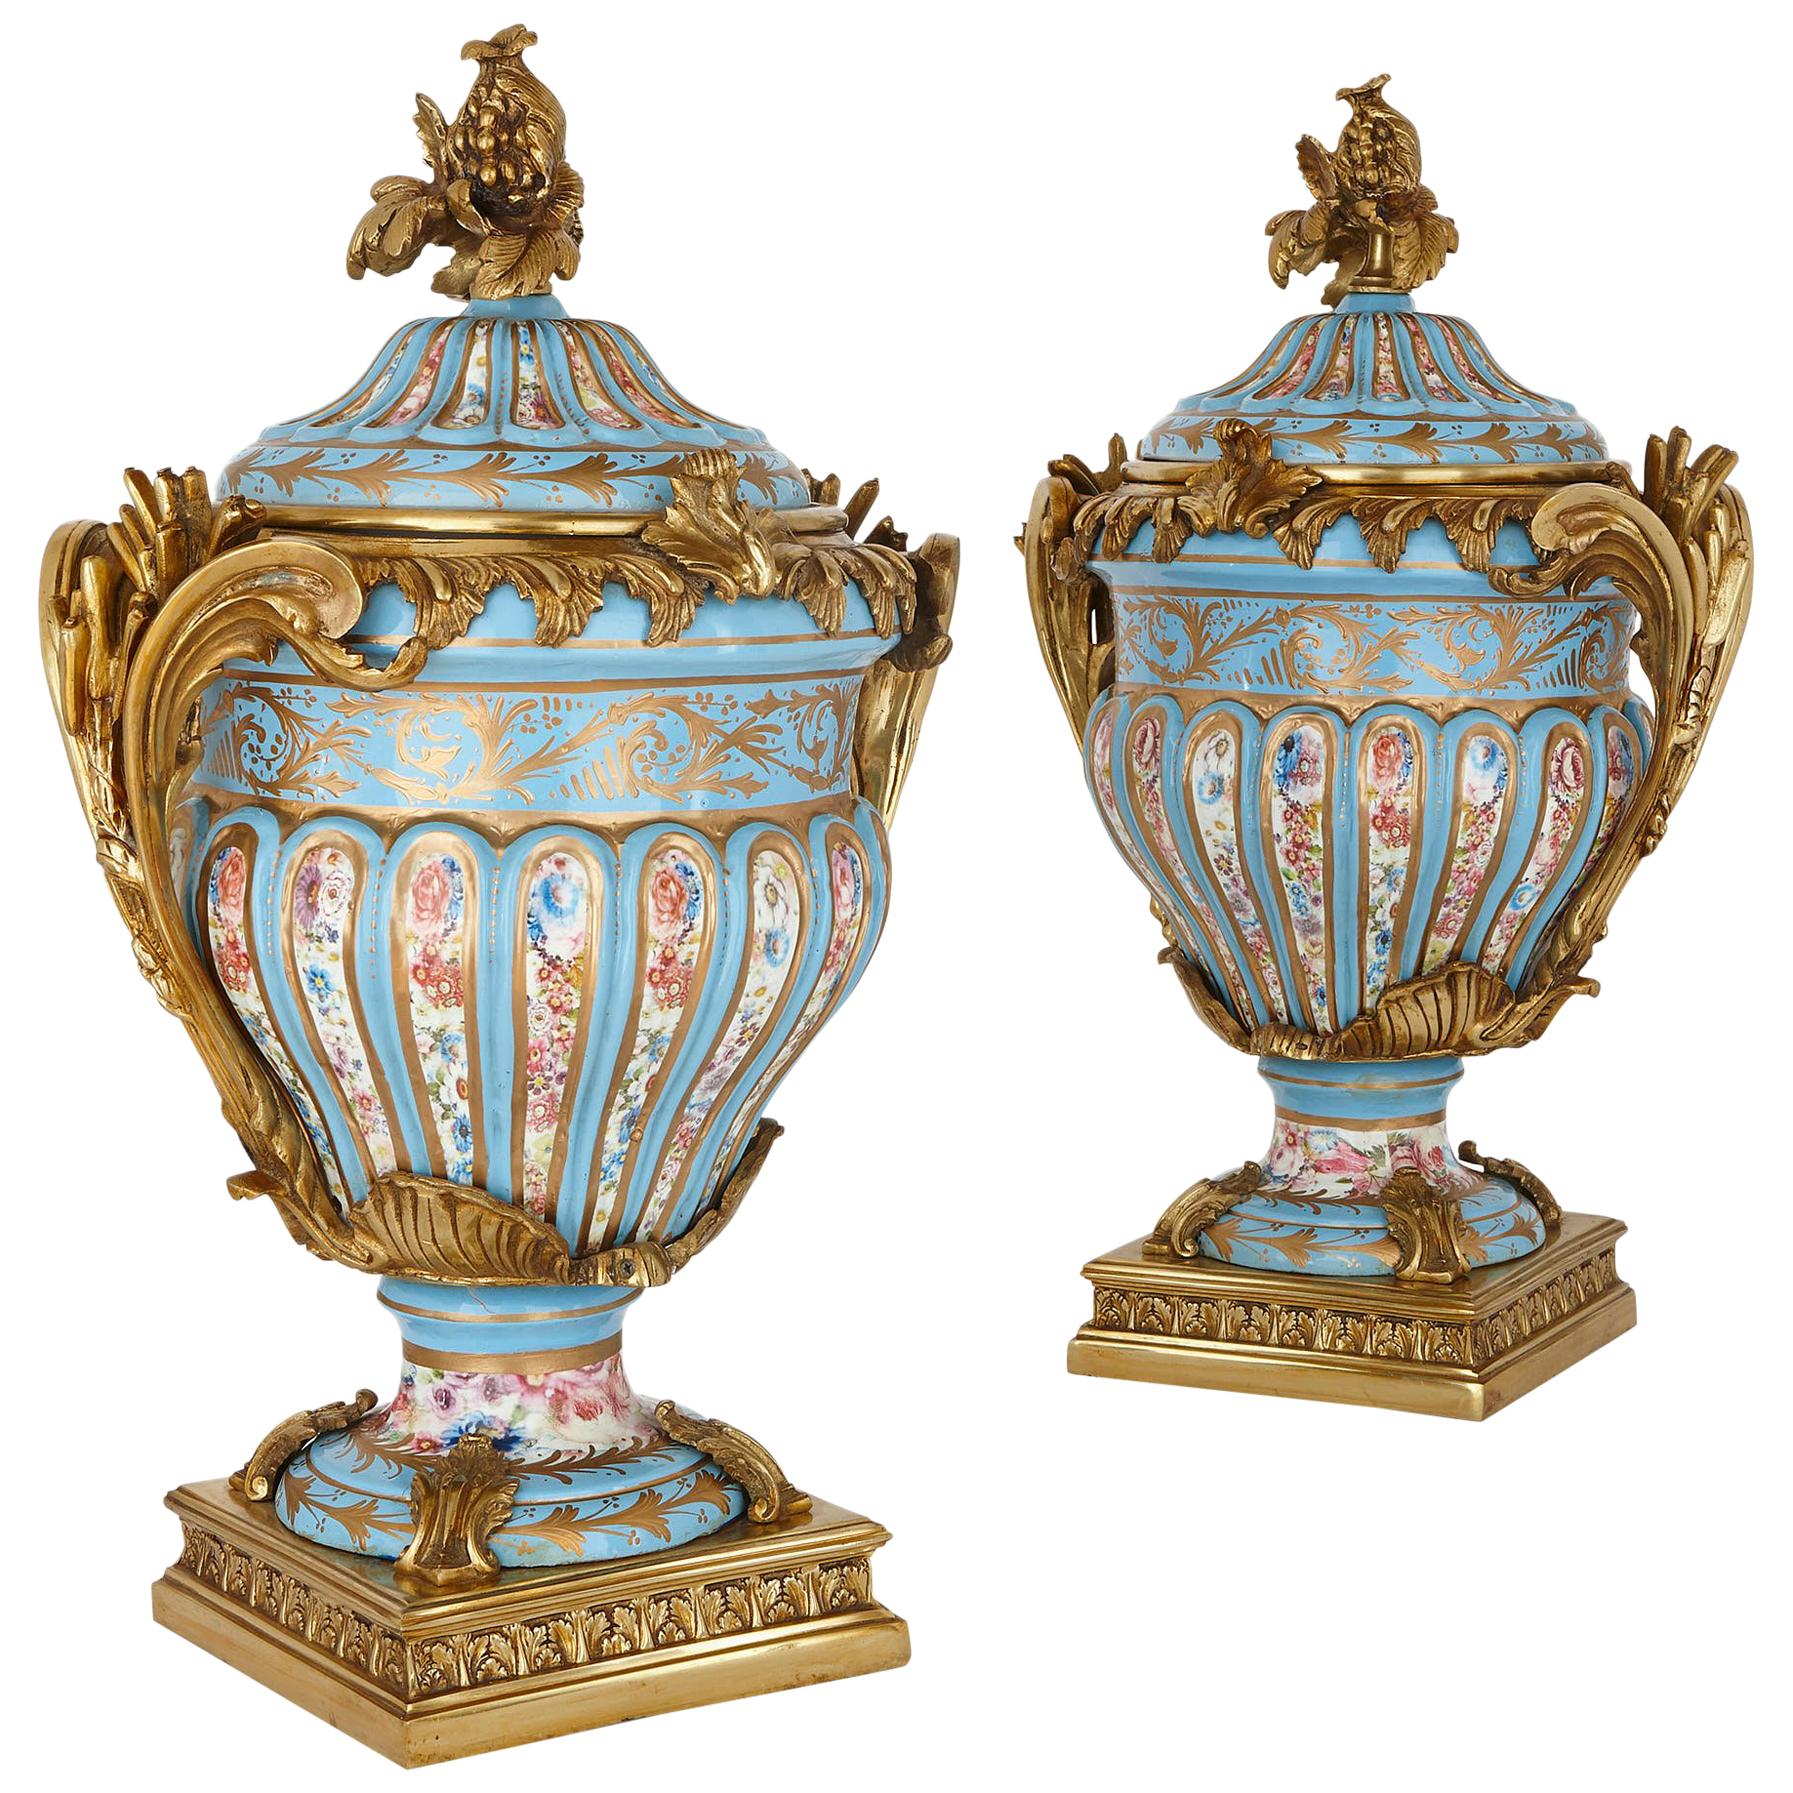 Two Sevres Style Porcelain and Gilt Bronze Urns